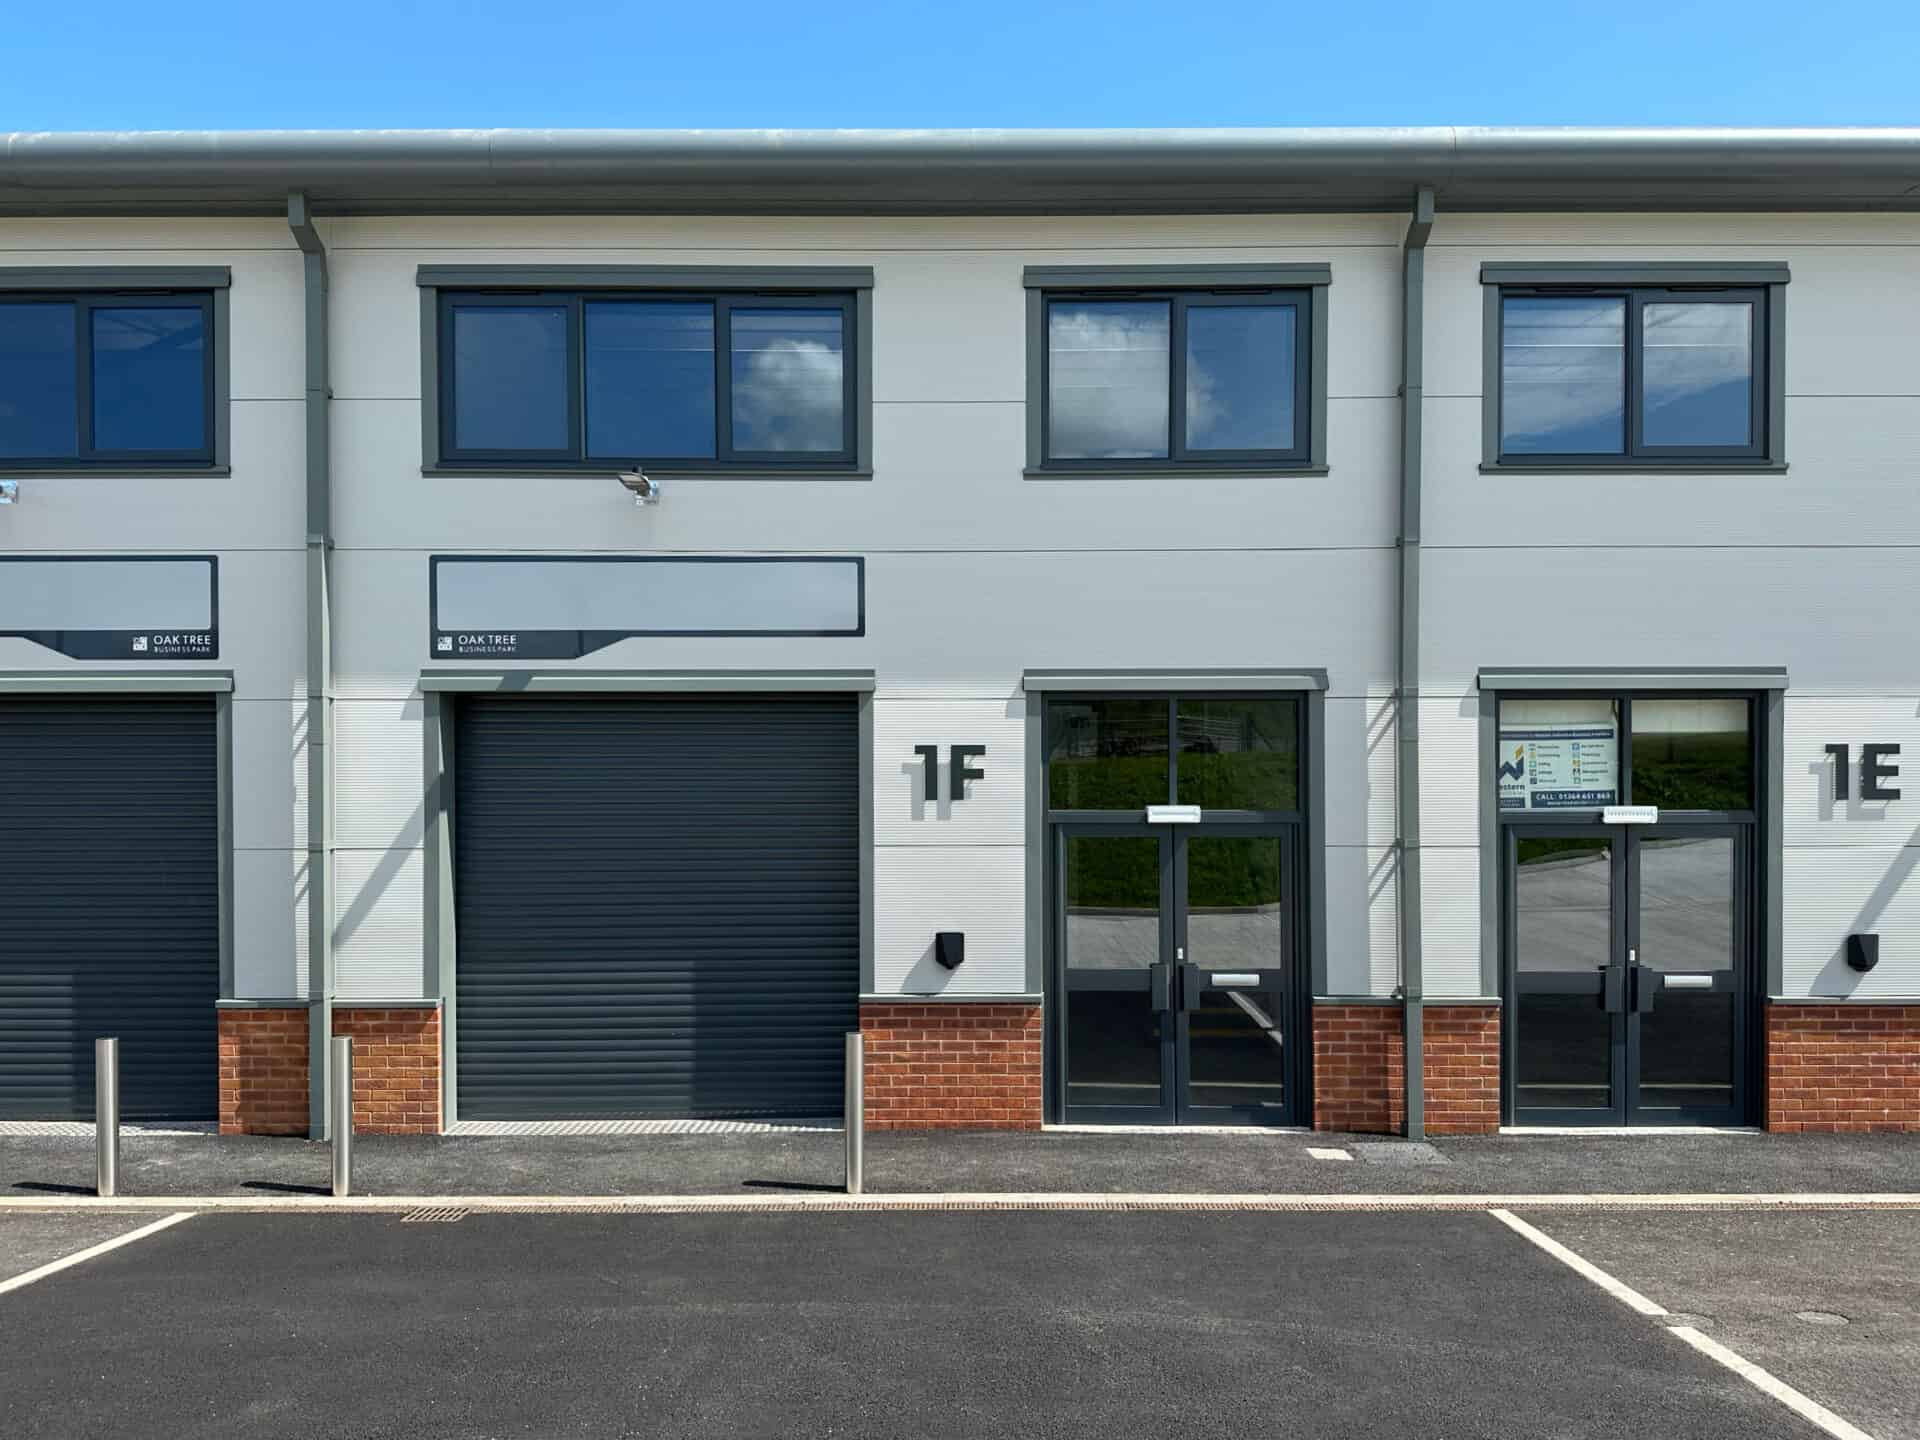 Front view of unit 1F at Oak Tree, Kingskerswell, providing a clear perspective of one light industrial unit available at the commercial development.